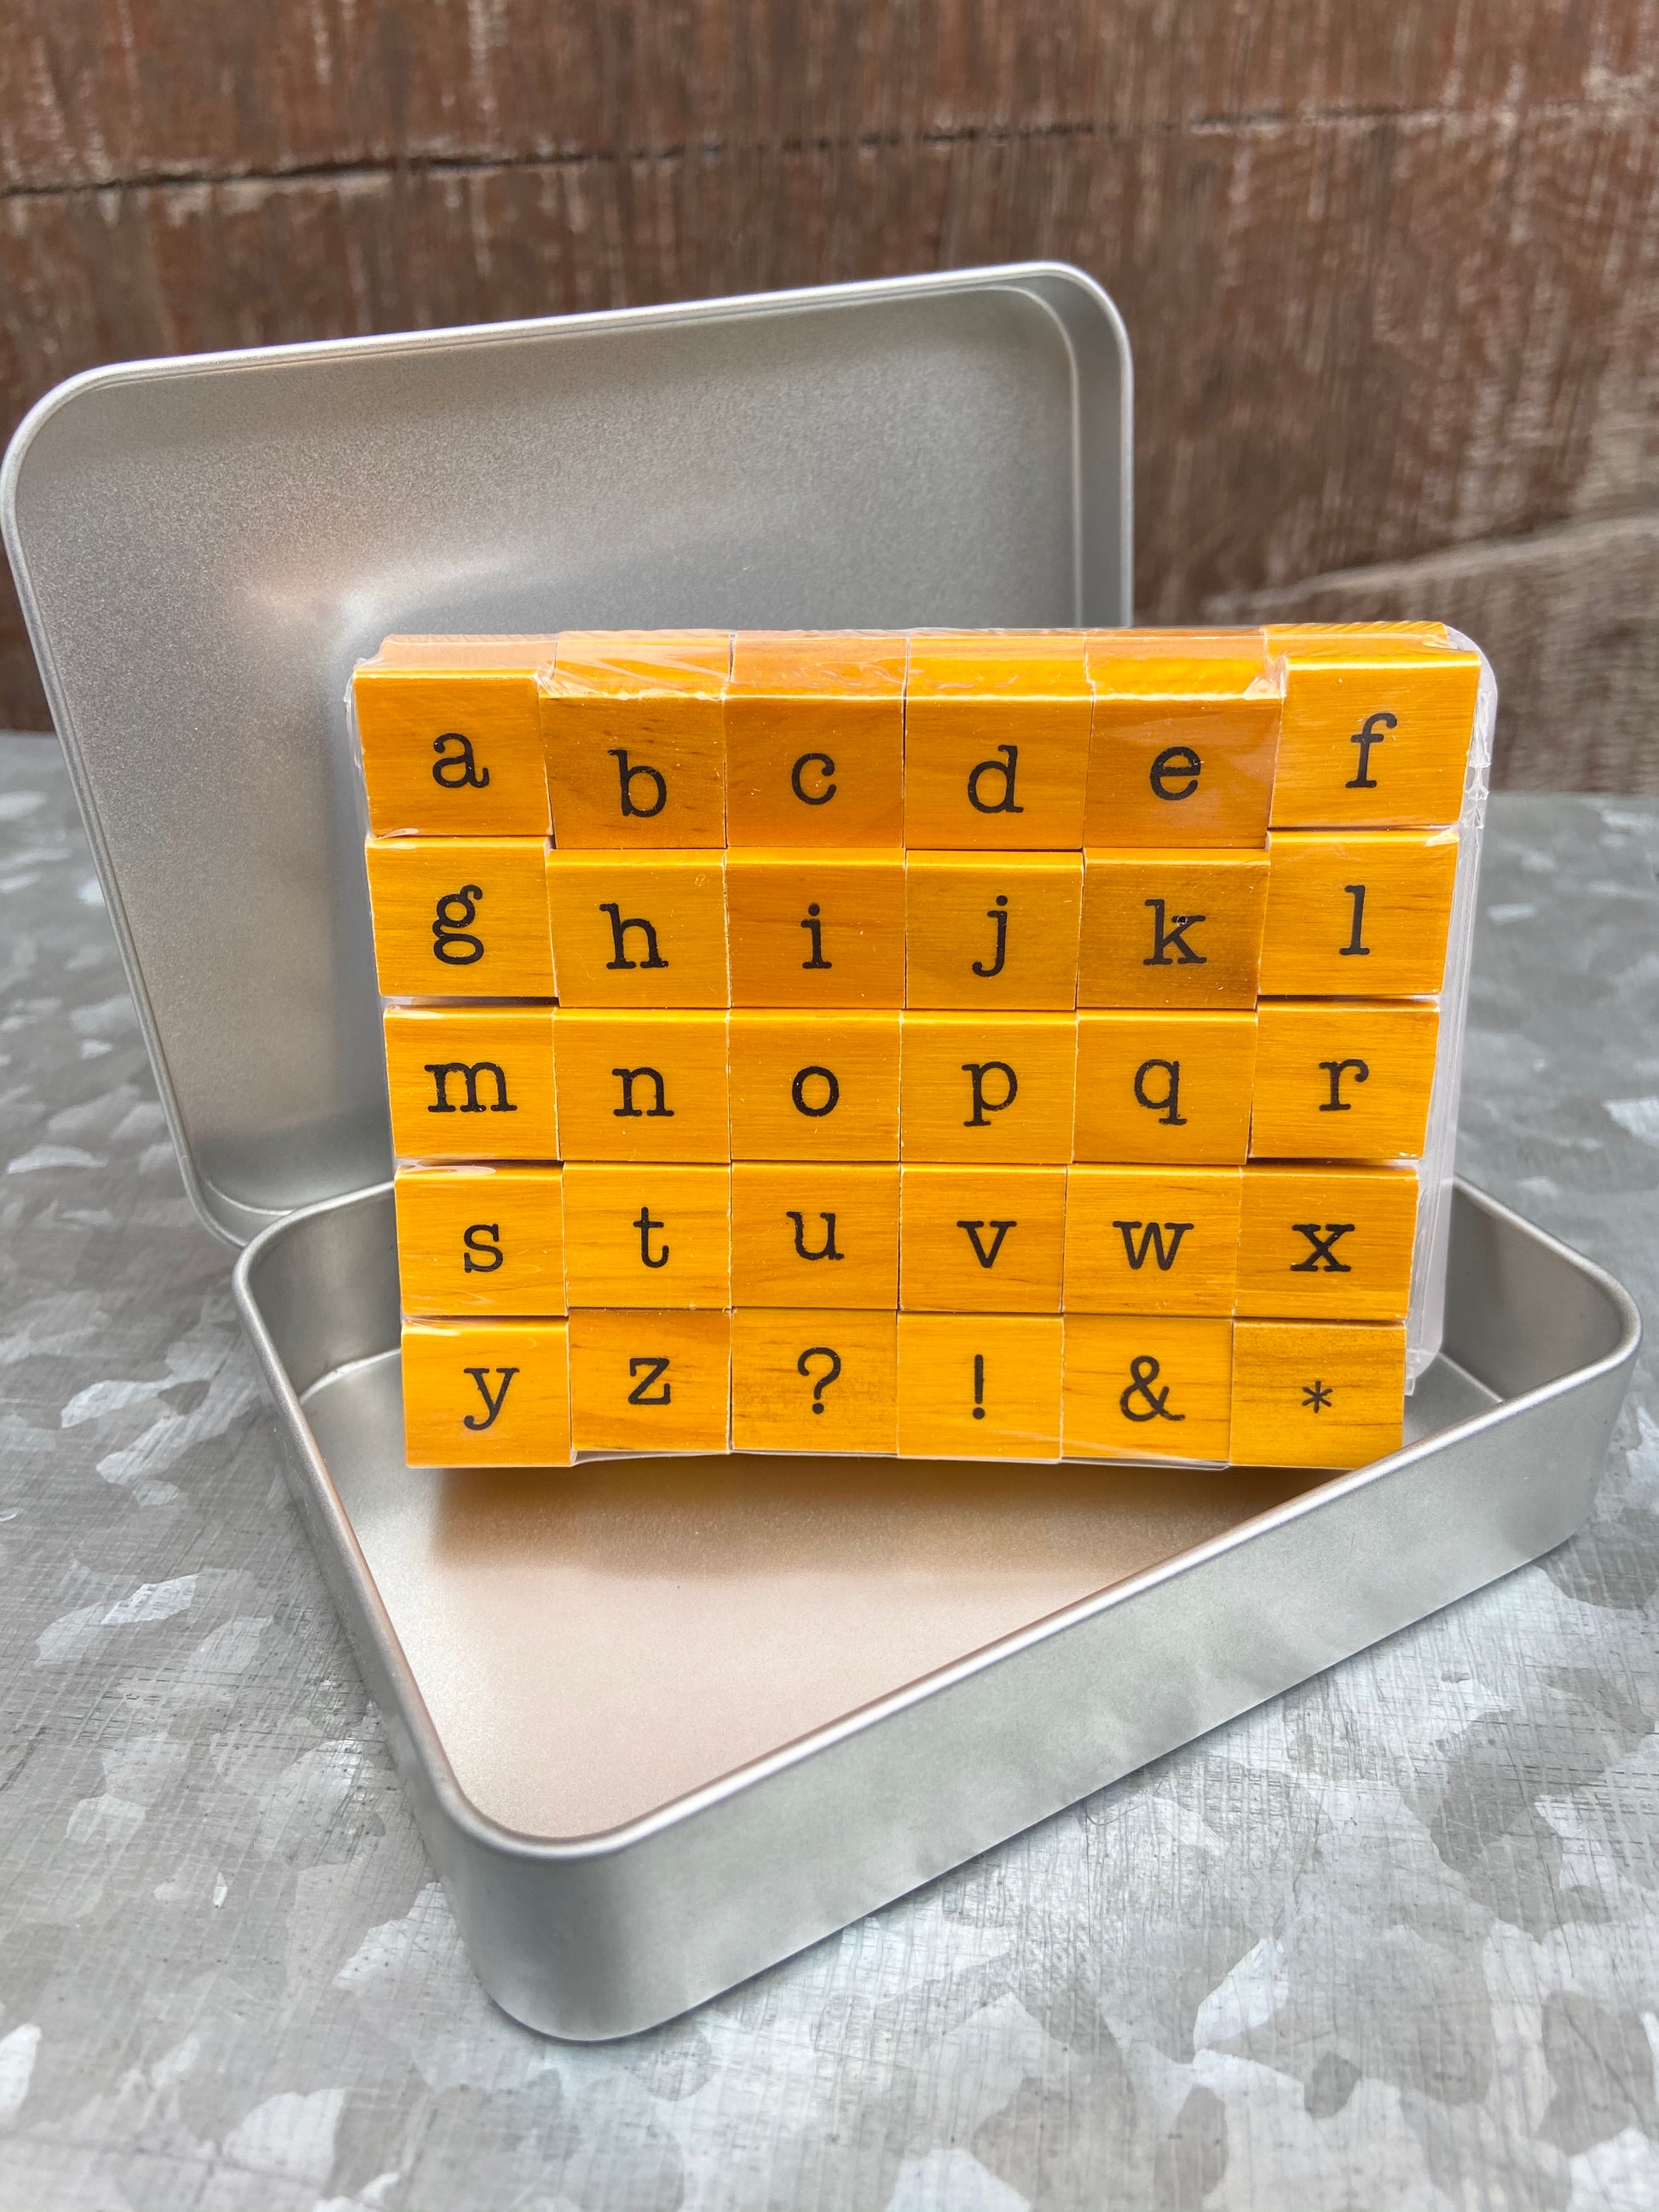 Set of vintage, wooden, rubber stamps. Set includes 26 lowercase alphabet plus 4 punctuation stamps. Stamps are approximately 1/2" square.